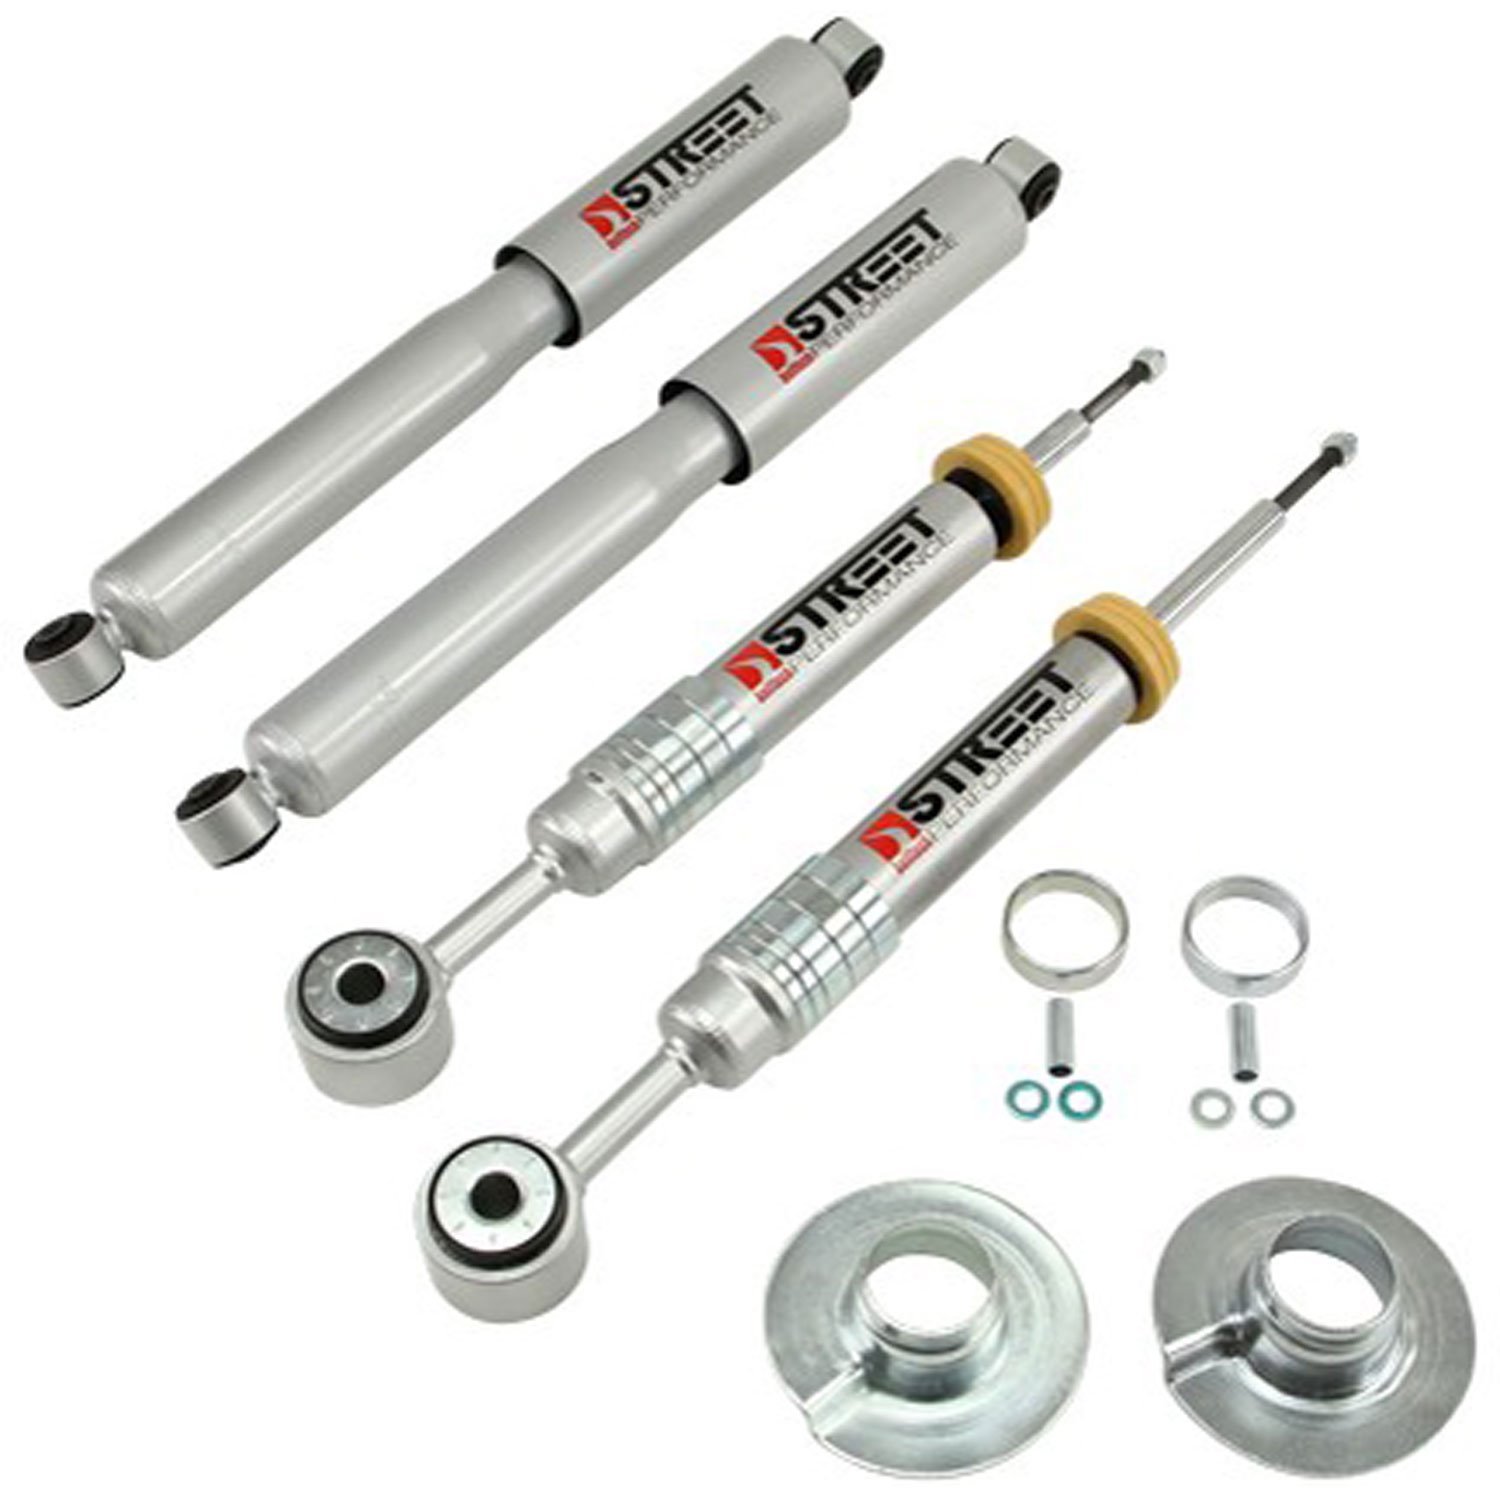 Street Performance Shock Set includes (2) 146-2105DD Front Shocks and (2) 146-2212IF Rear Shocks